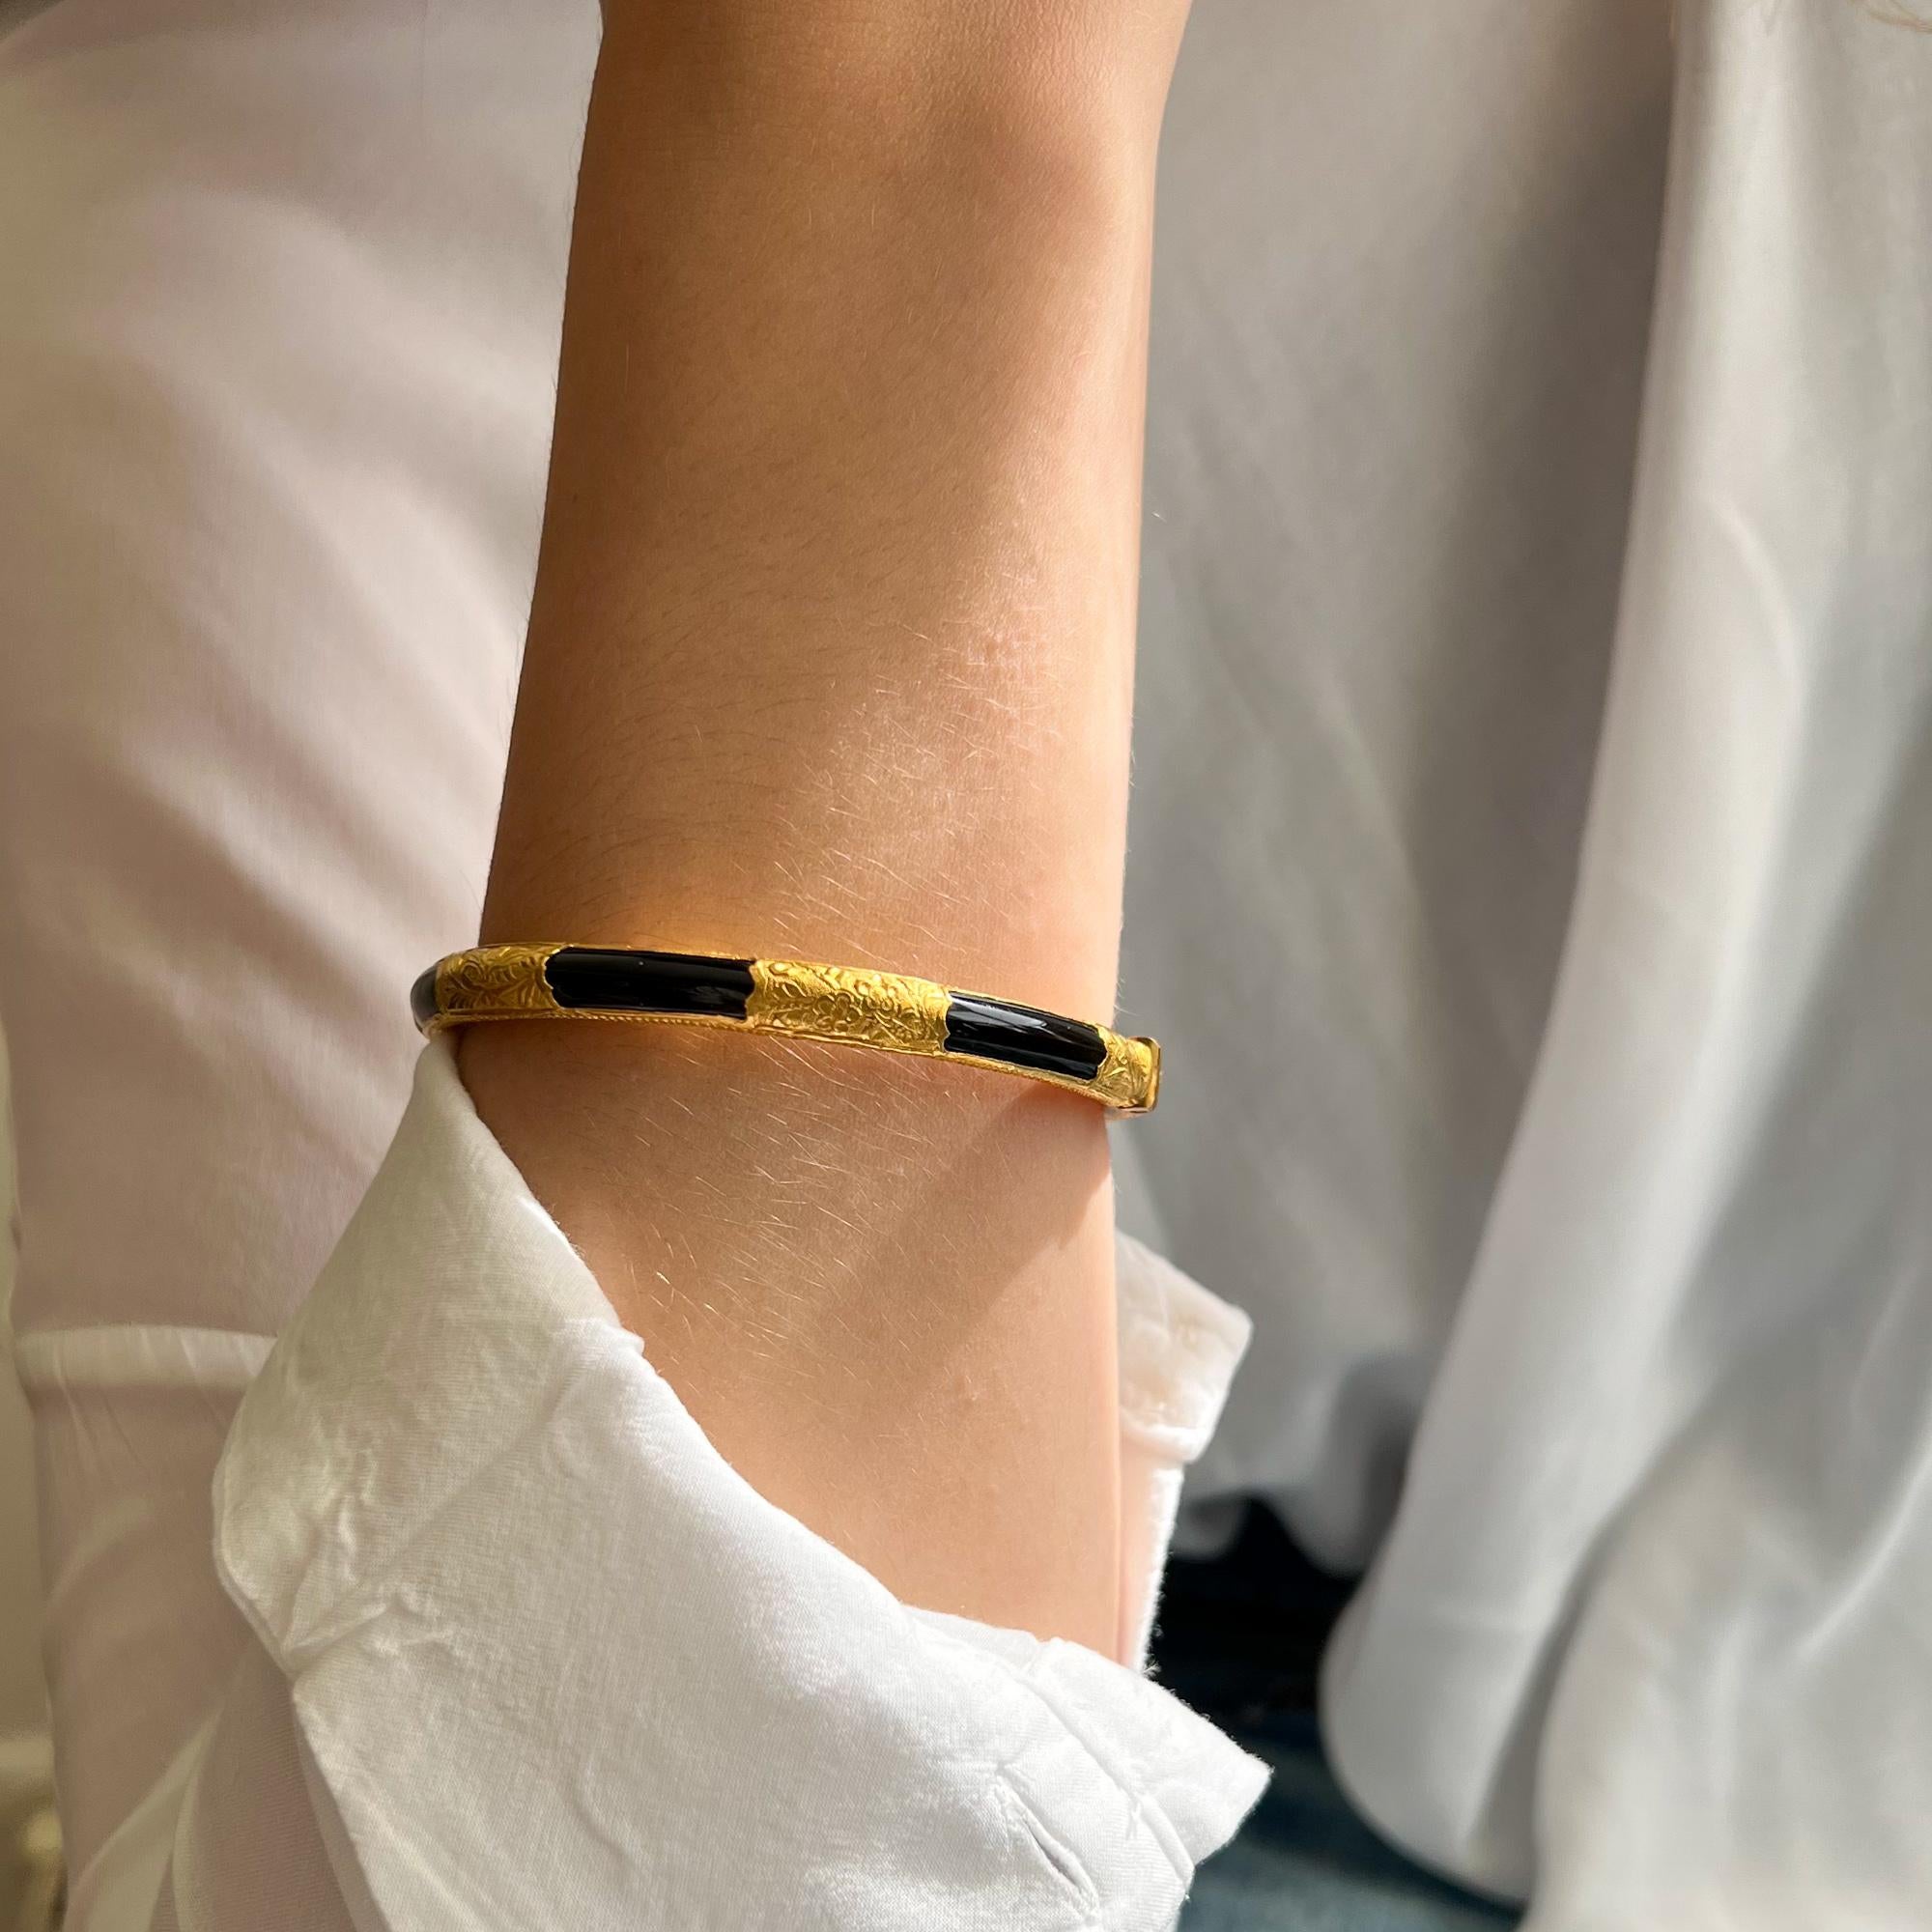 A bangle bracelet with a beautiful combination of onyx and warm yellow gold. This 20 karat gold bangle bracelet has six floral engraved compartments with flowers and leaf design. Between the gold six black onyx sections accentuates the engraved 20